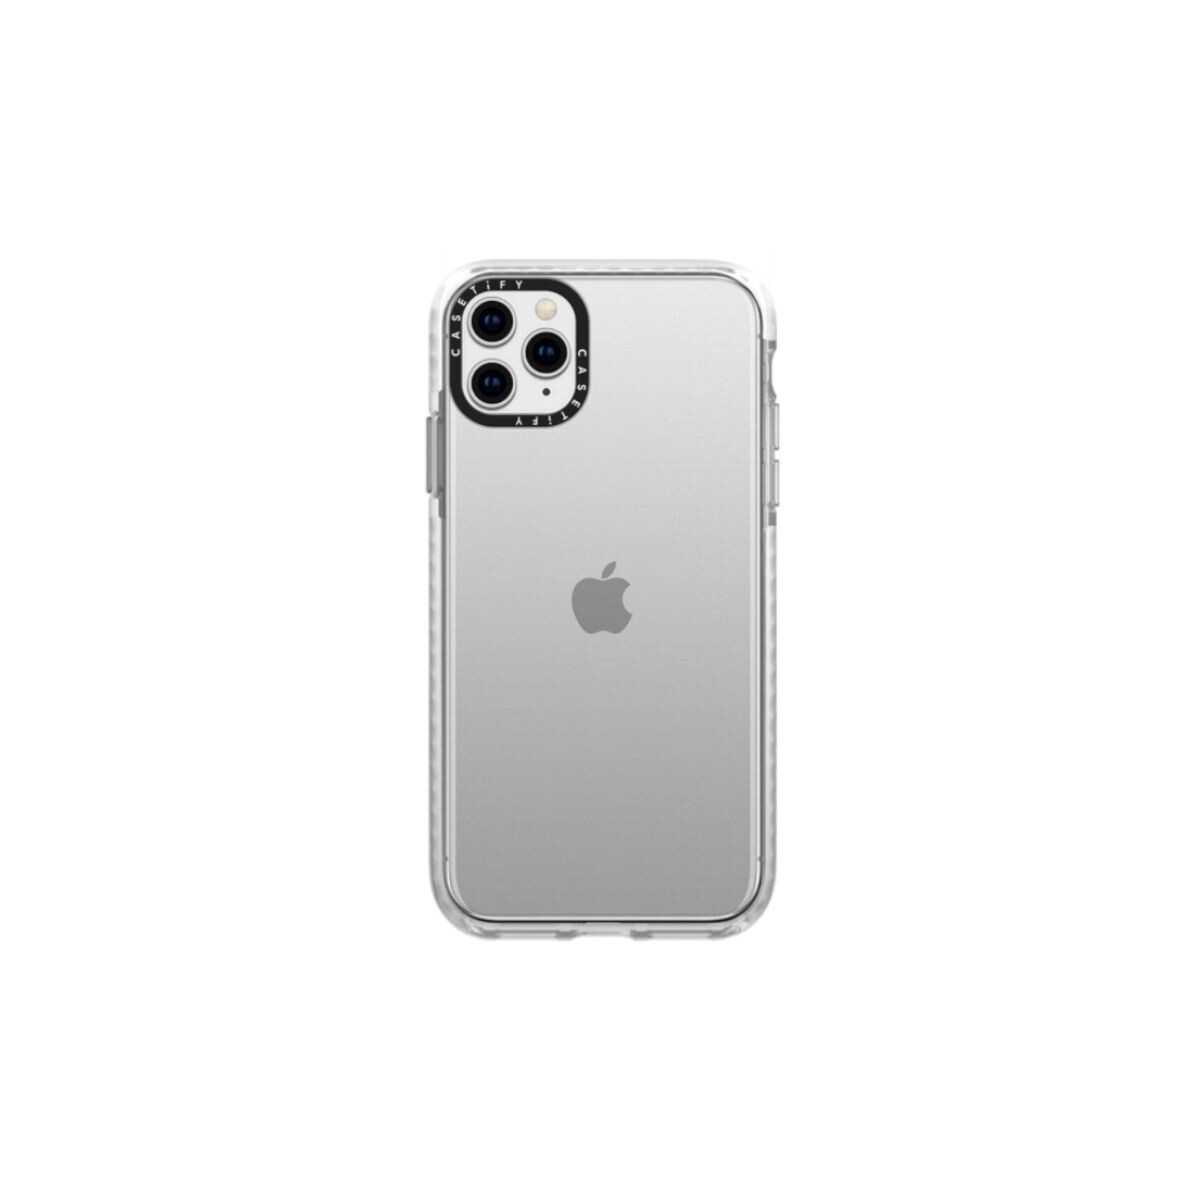 Protector Casetify Para Iphone 11 Pro Max 